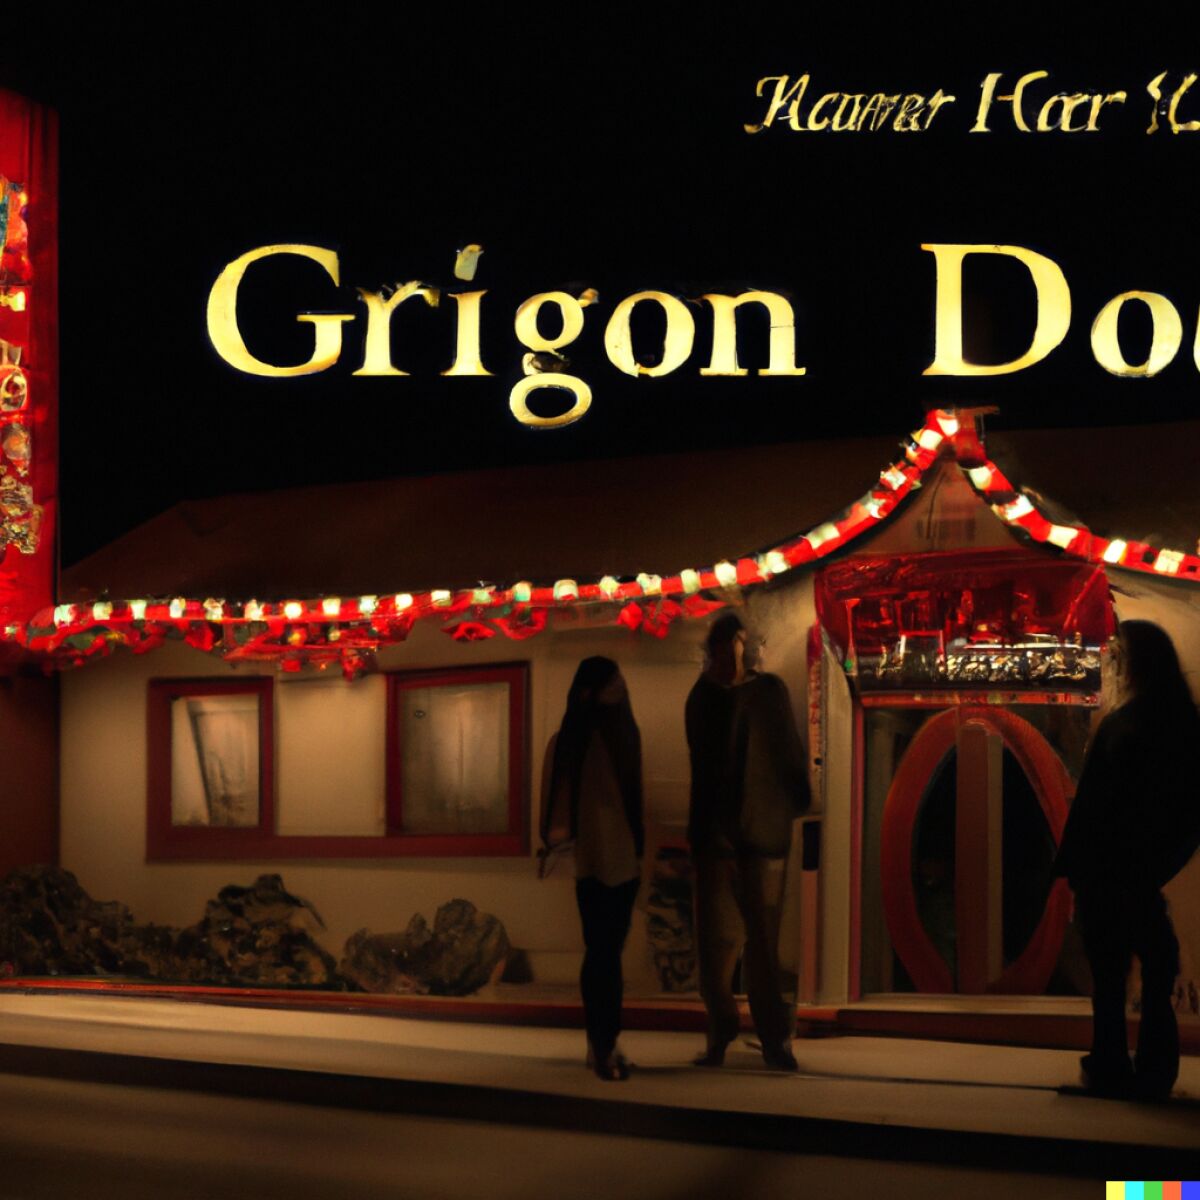 three people standing in front of a building with a sign that reads "Grigon Do"